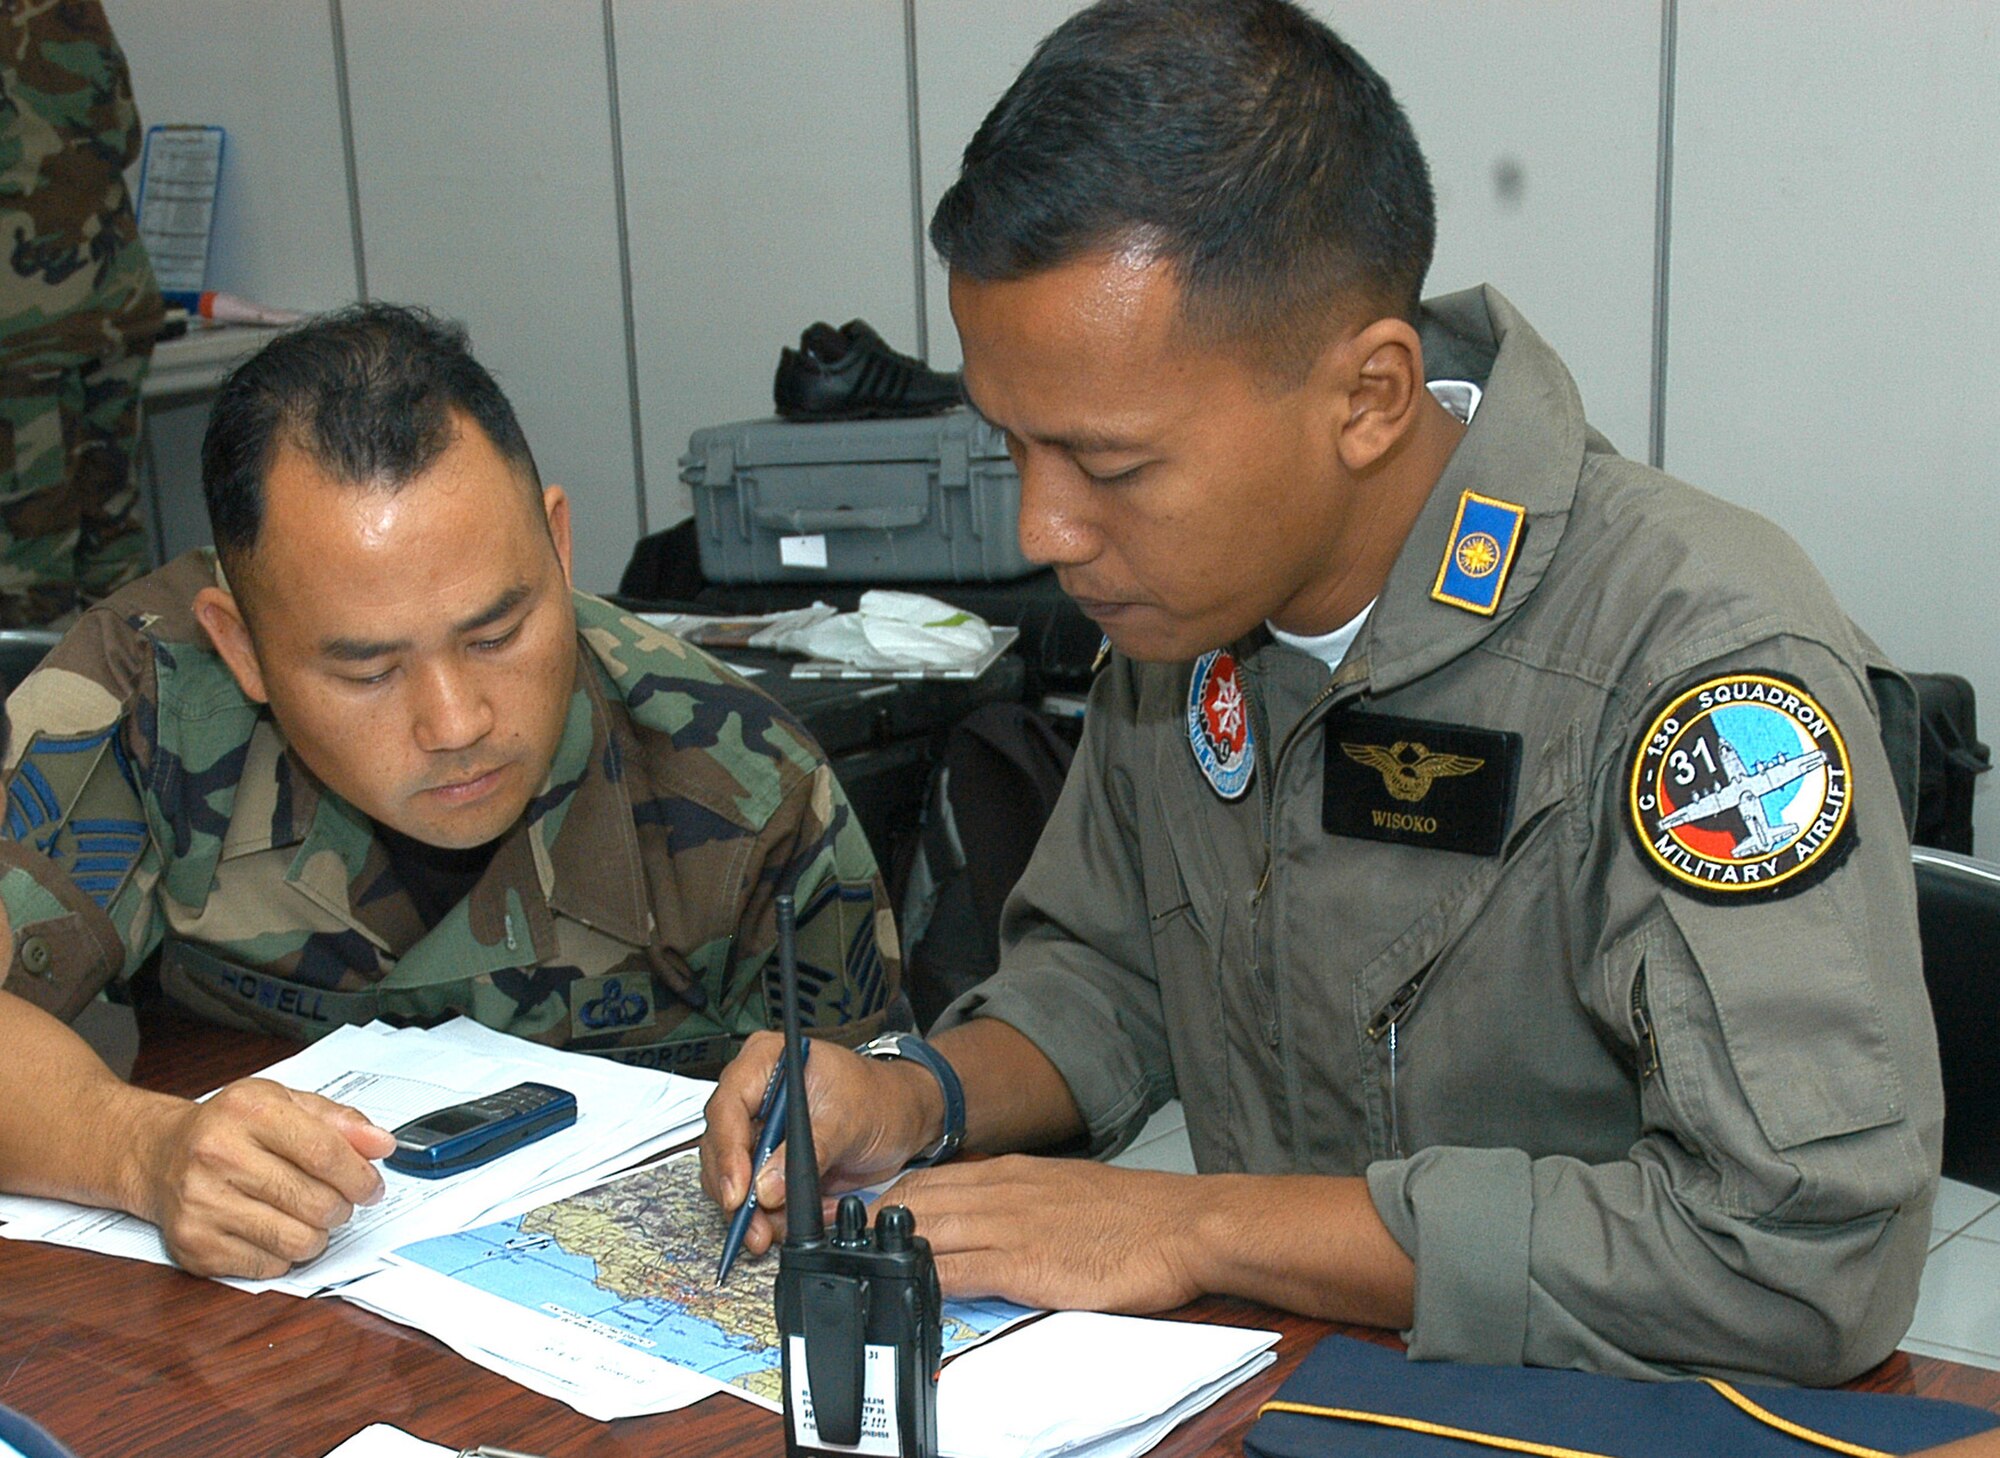 Master Sgt. Joe Howell, 353rd Special Operations Group air space controller, goes over control tower issues with Capt. Edwardus Wisoko, operations chief for Squadron 31 of the Indonesian Air Force.  The exchange was part of Exercise Teak Iron, an exercise between the U.S. Air Force and the Indonesian Air Force.
(U.S. Air Force photo/Master Sgt. Marilyn C. Holliday)